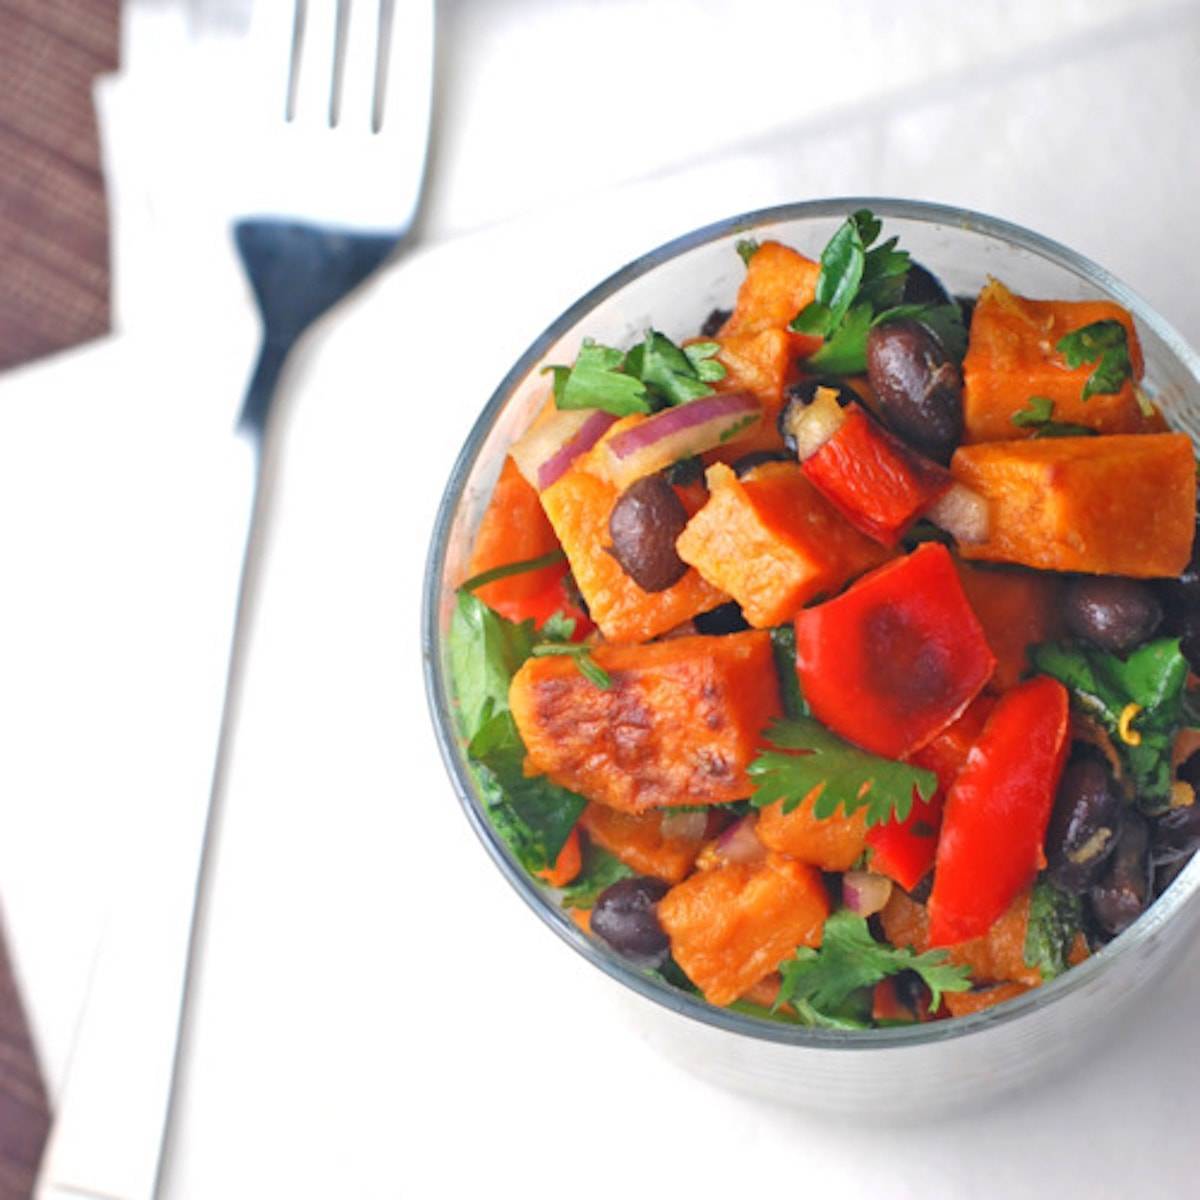 Roasted sweet potato with roasted sweet potatoes and a simple dressing.